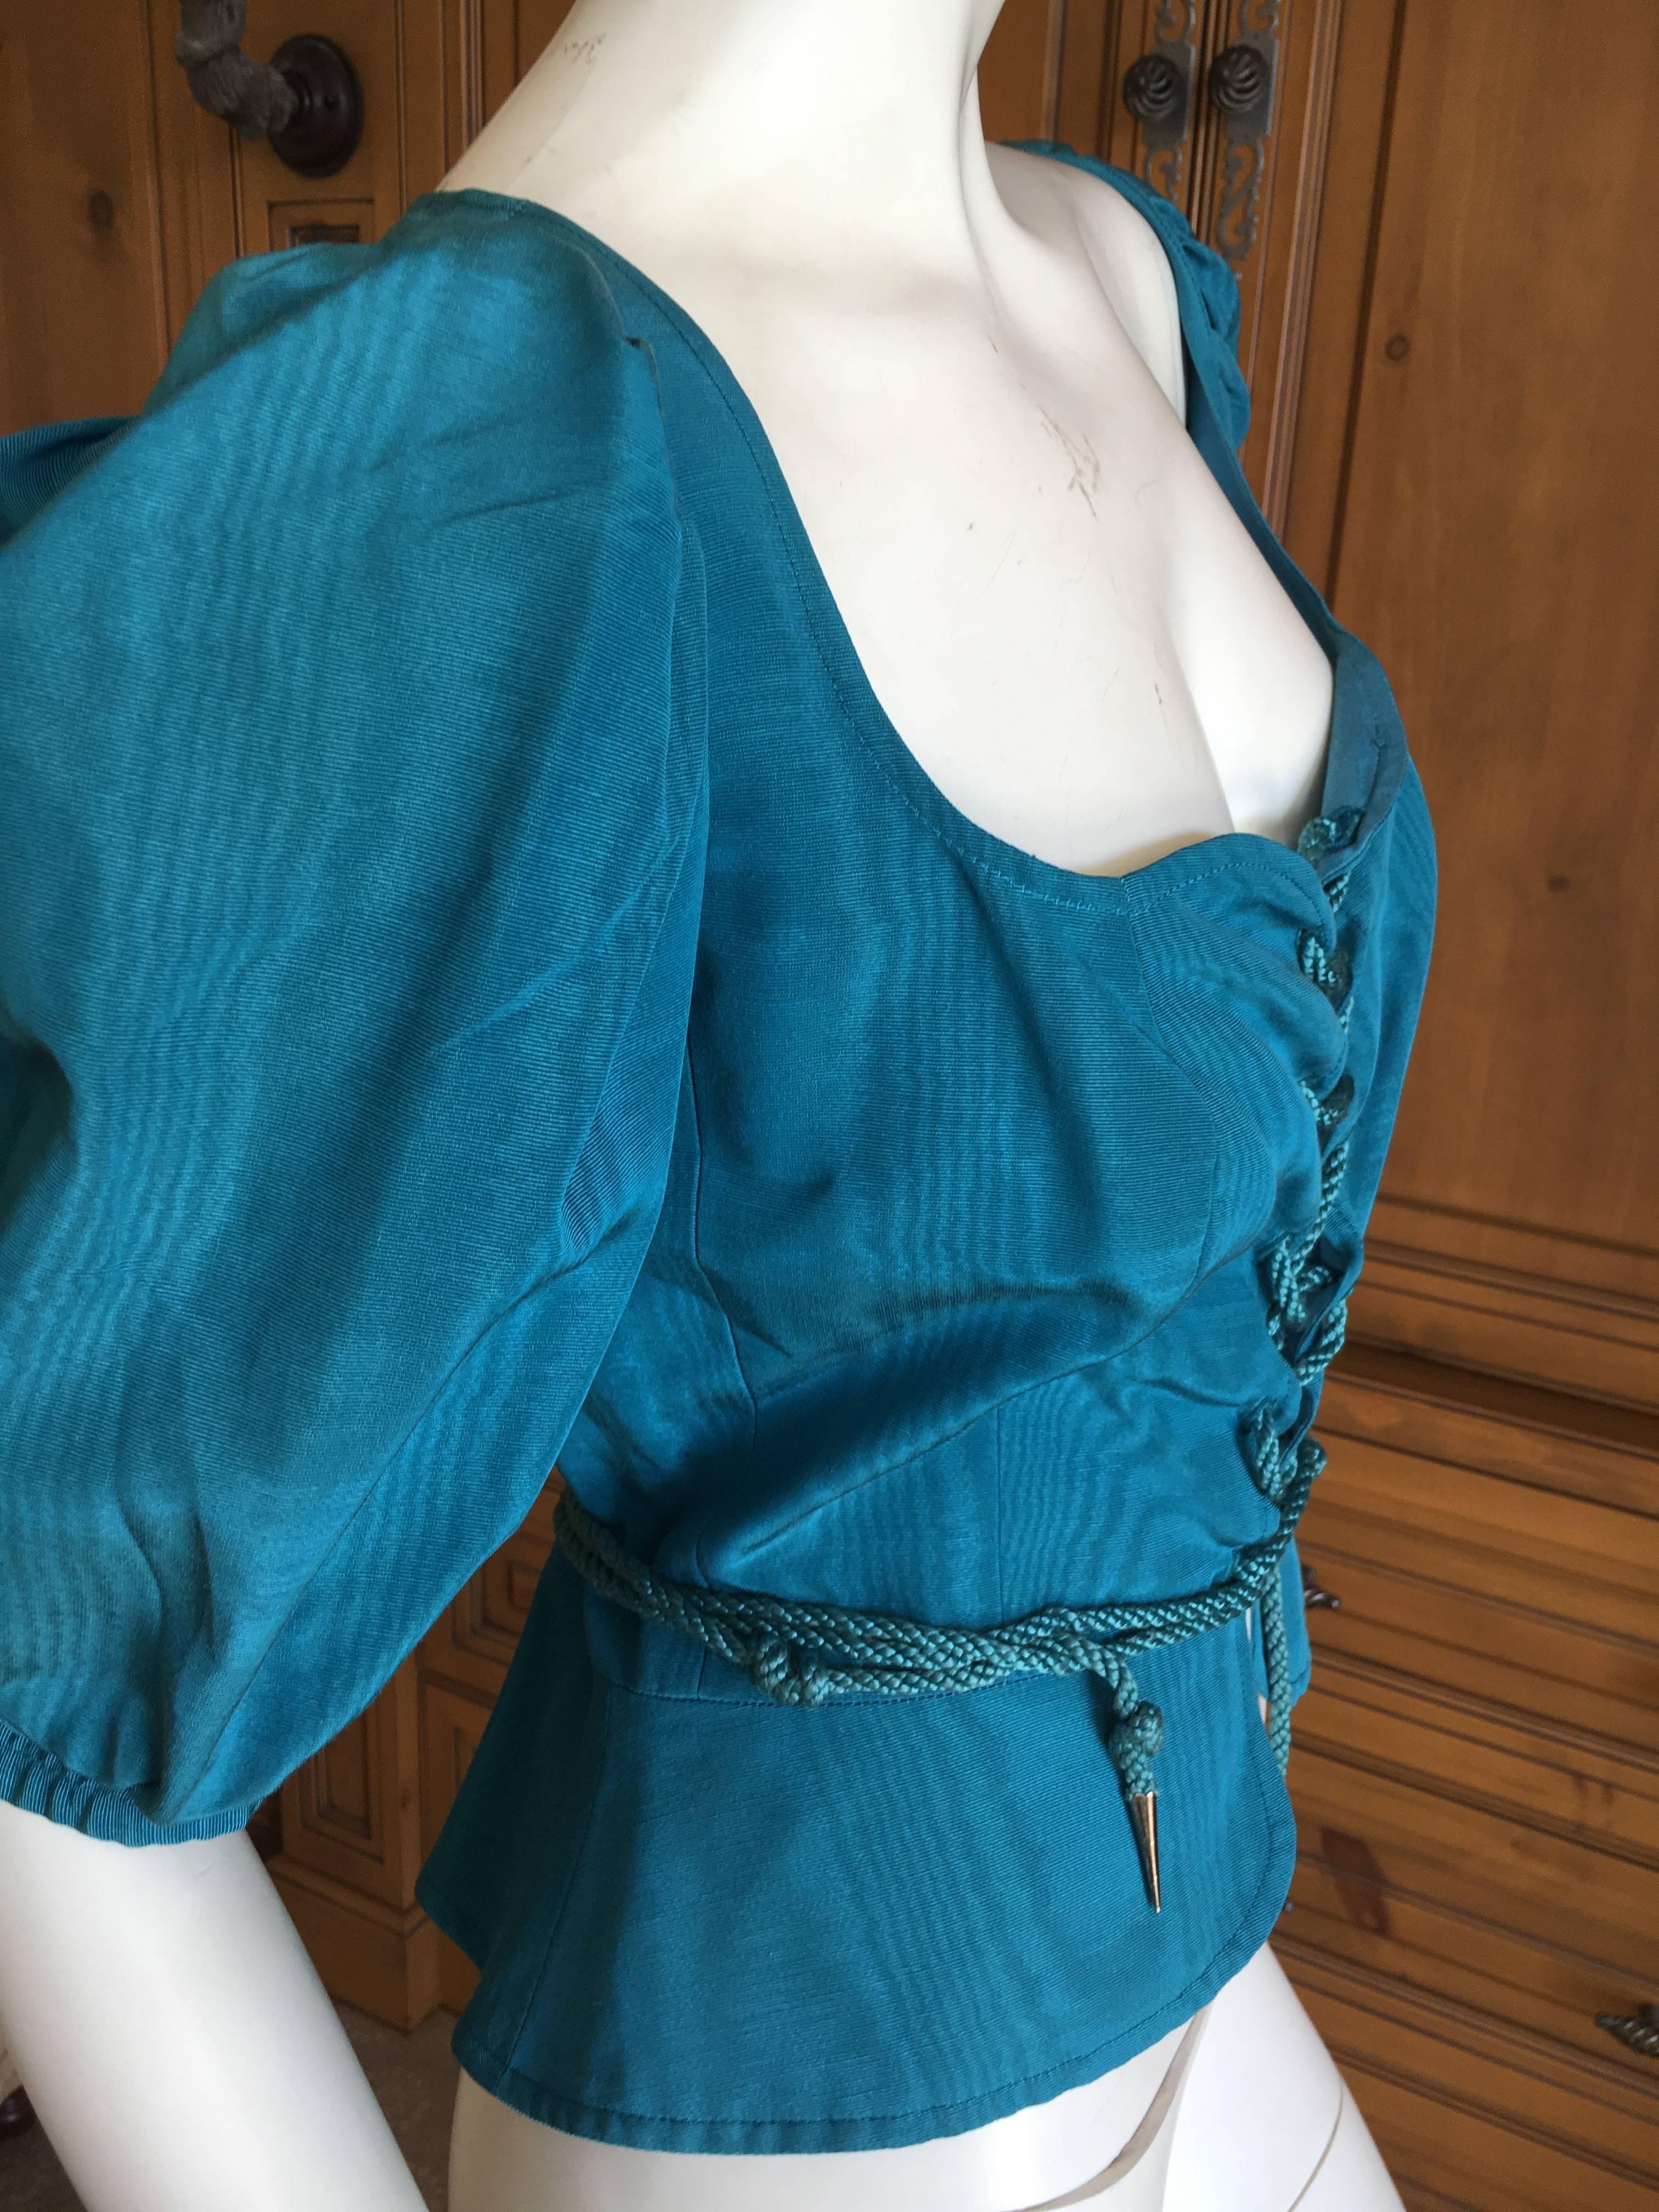 Yves Saint Laurent Rive Gauche 1970's Turquoise Silk Moire Corset Lace Top In Excellent Condition For Sale In Cloverdale, CA